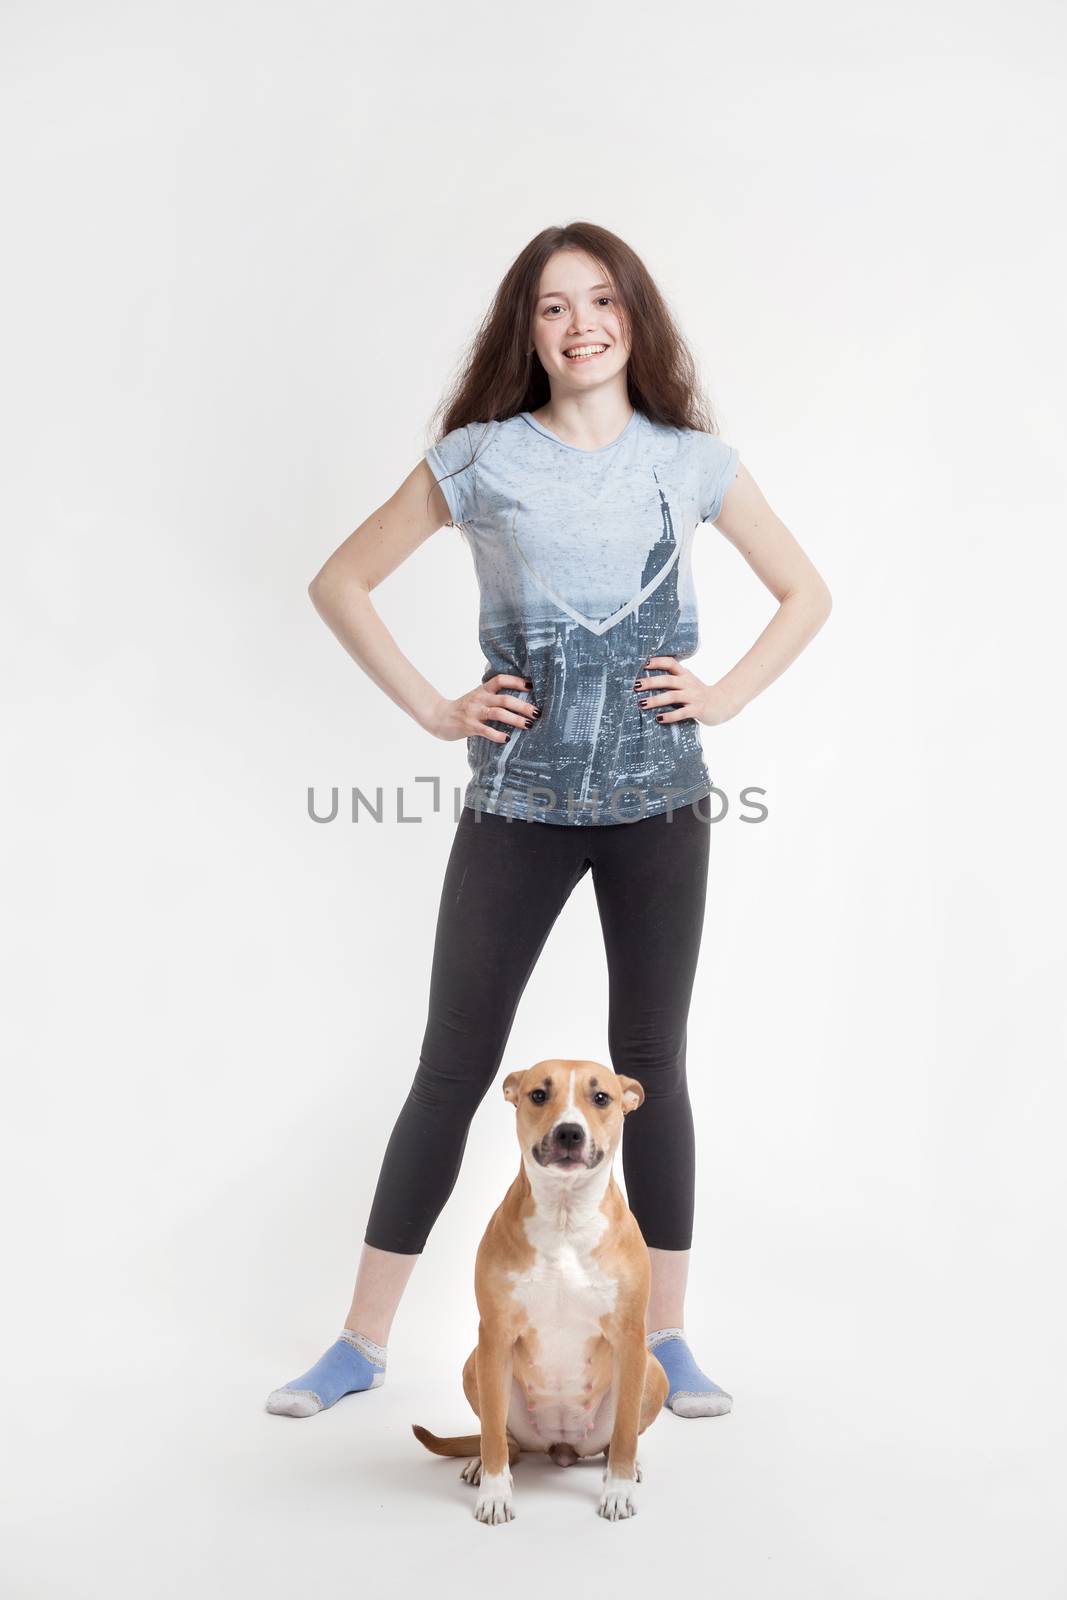 the young beautiful girl and her dog on a white background